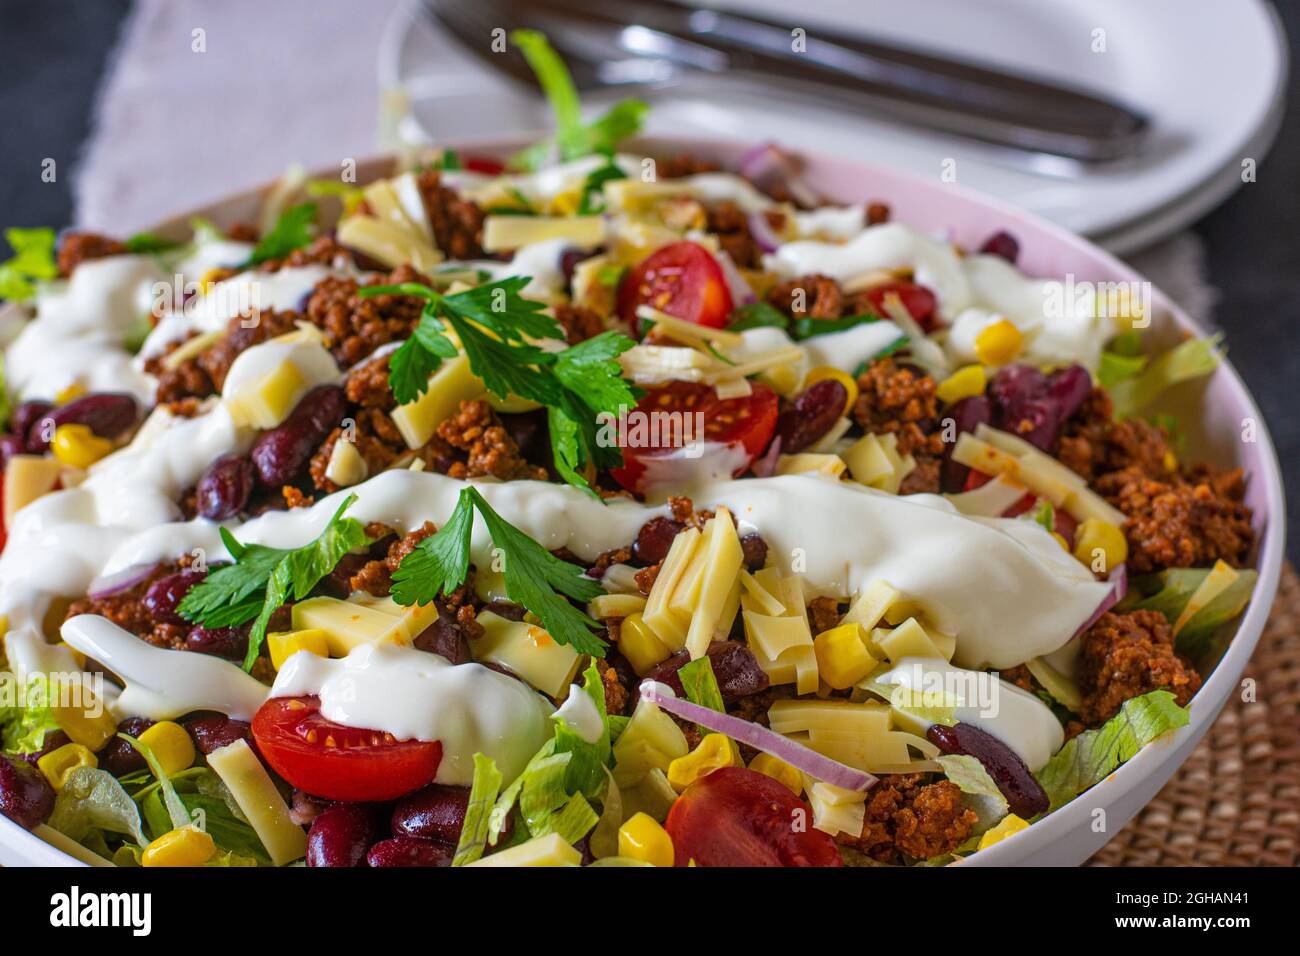 mexican taco salad or tex mex salad with spicy ground beef, vegetables, cheese and sour cream topping in a bowl Stock Photo